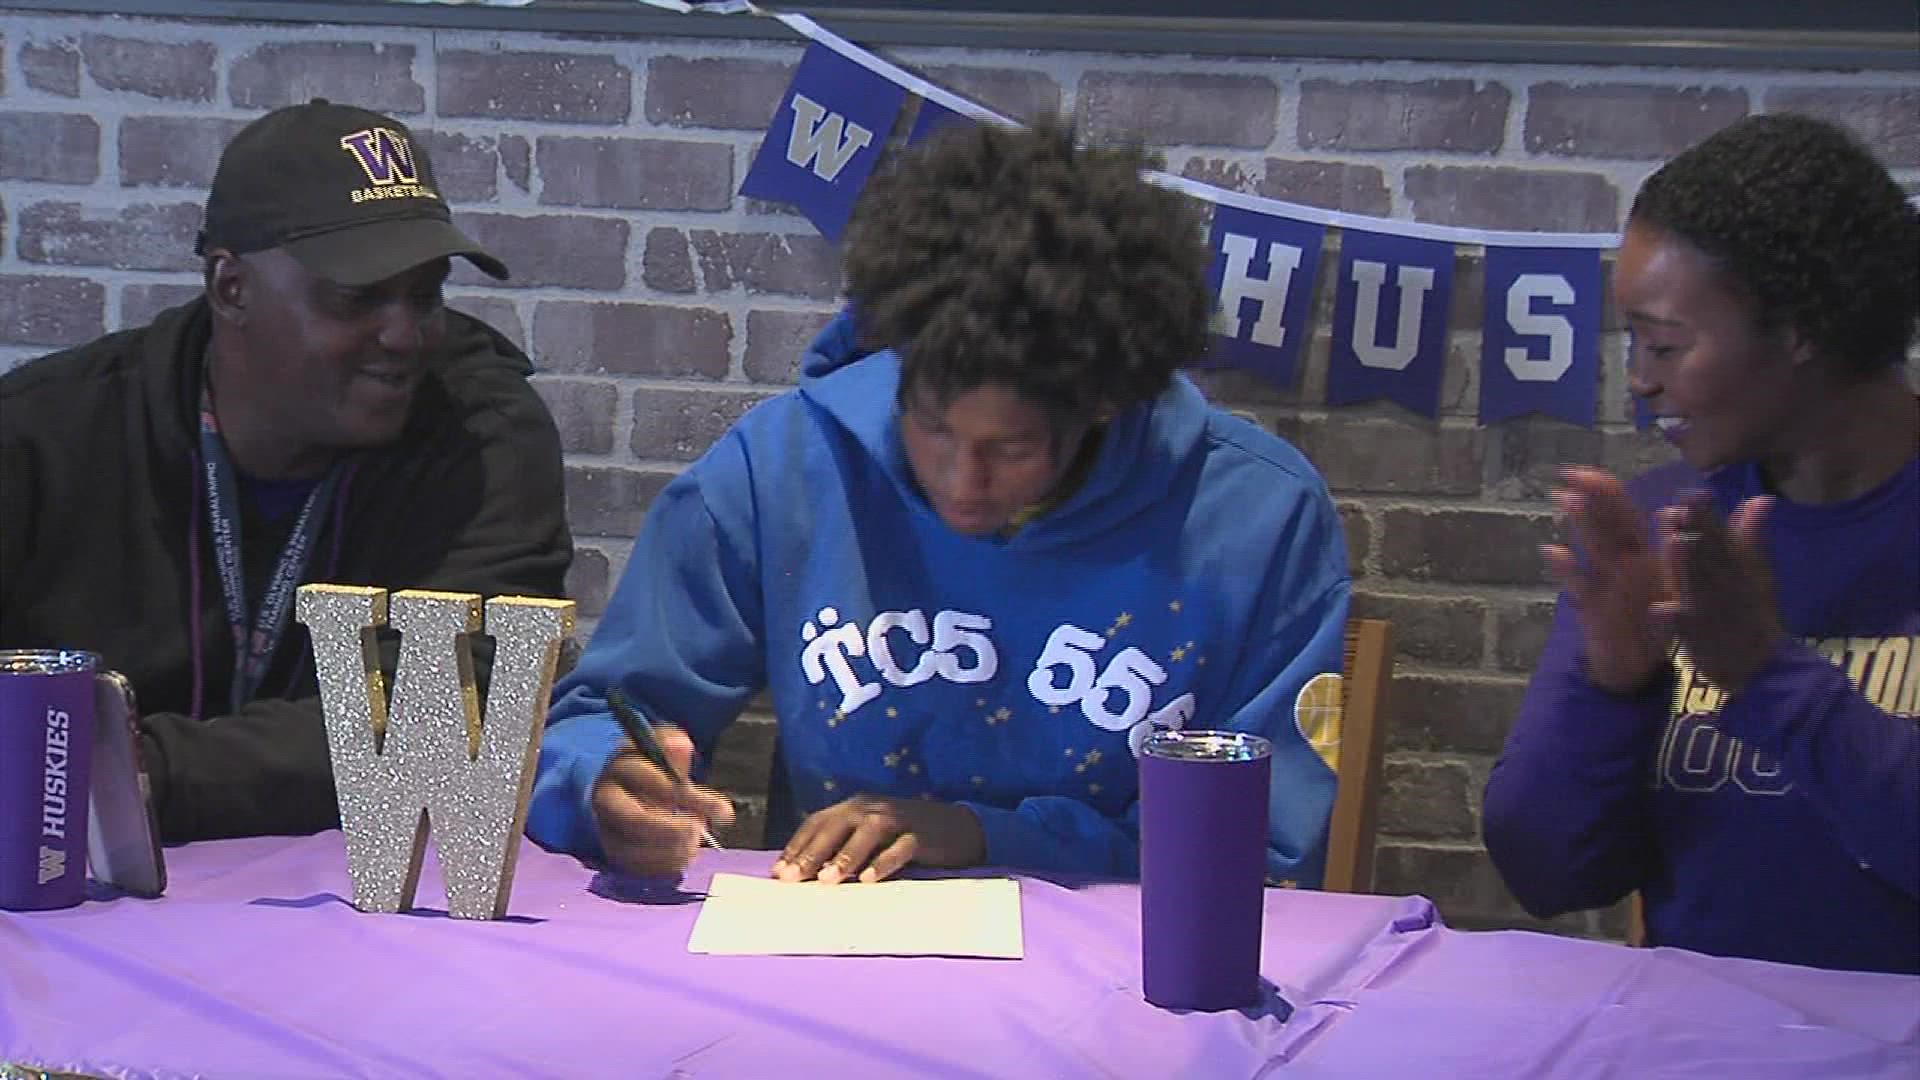 Beaumont United's Wesley Yates, III will take his talents to the University of Washington after graduation